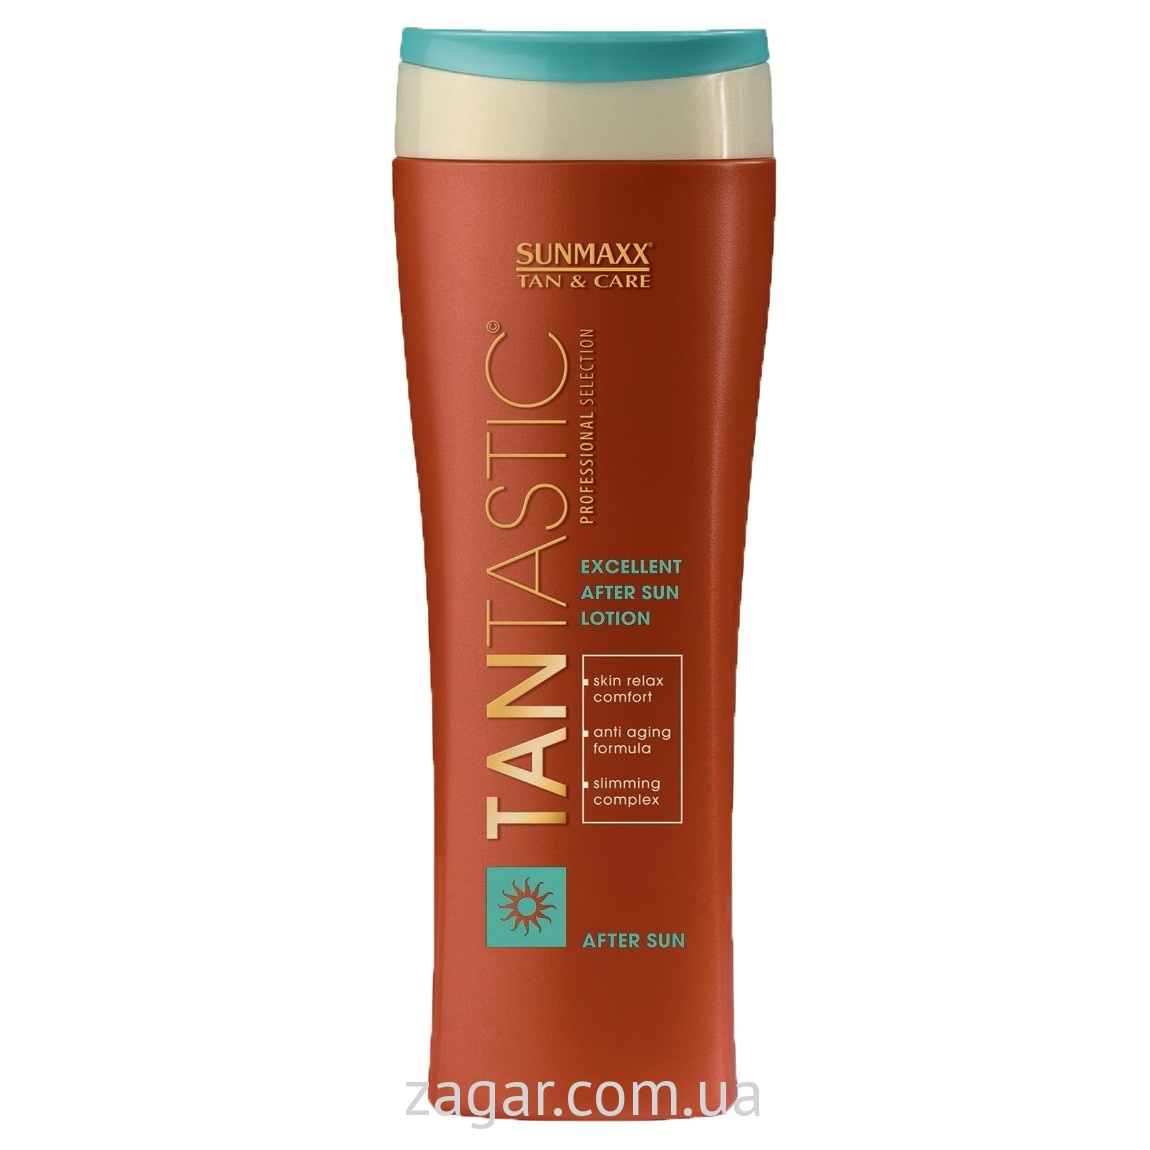 After Sun Excellent Lotion 250ml 